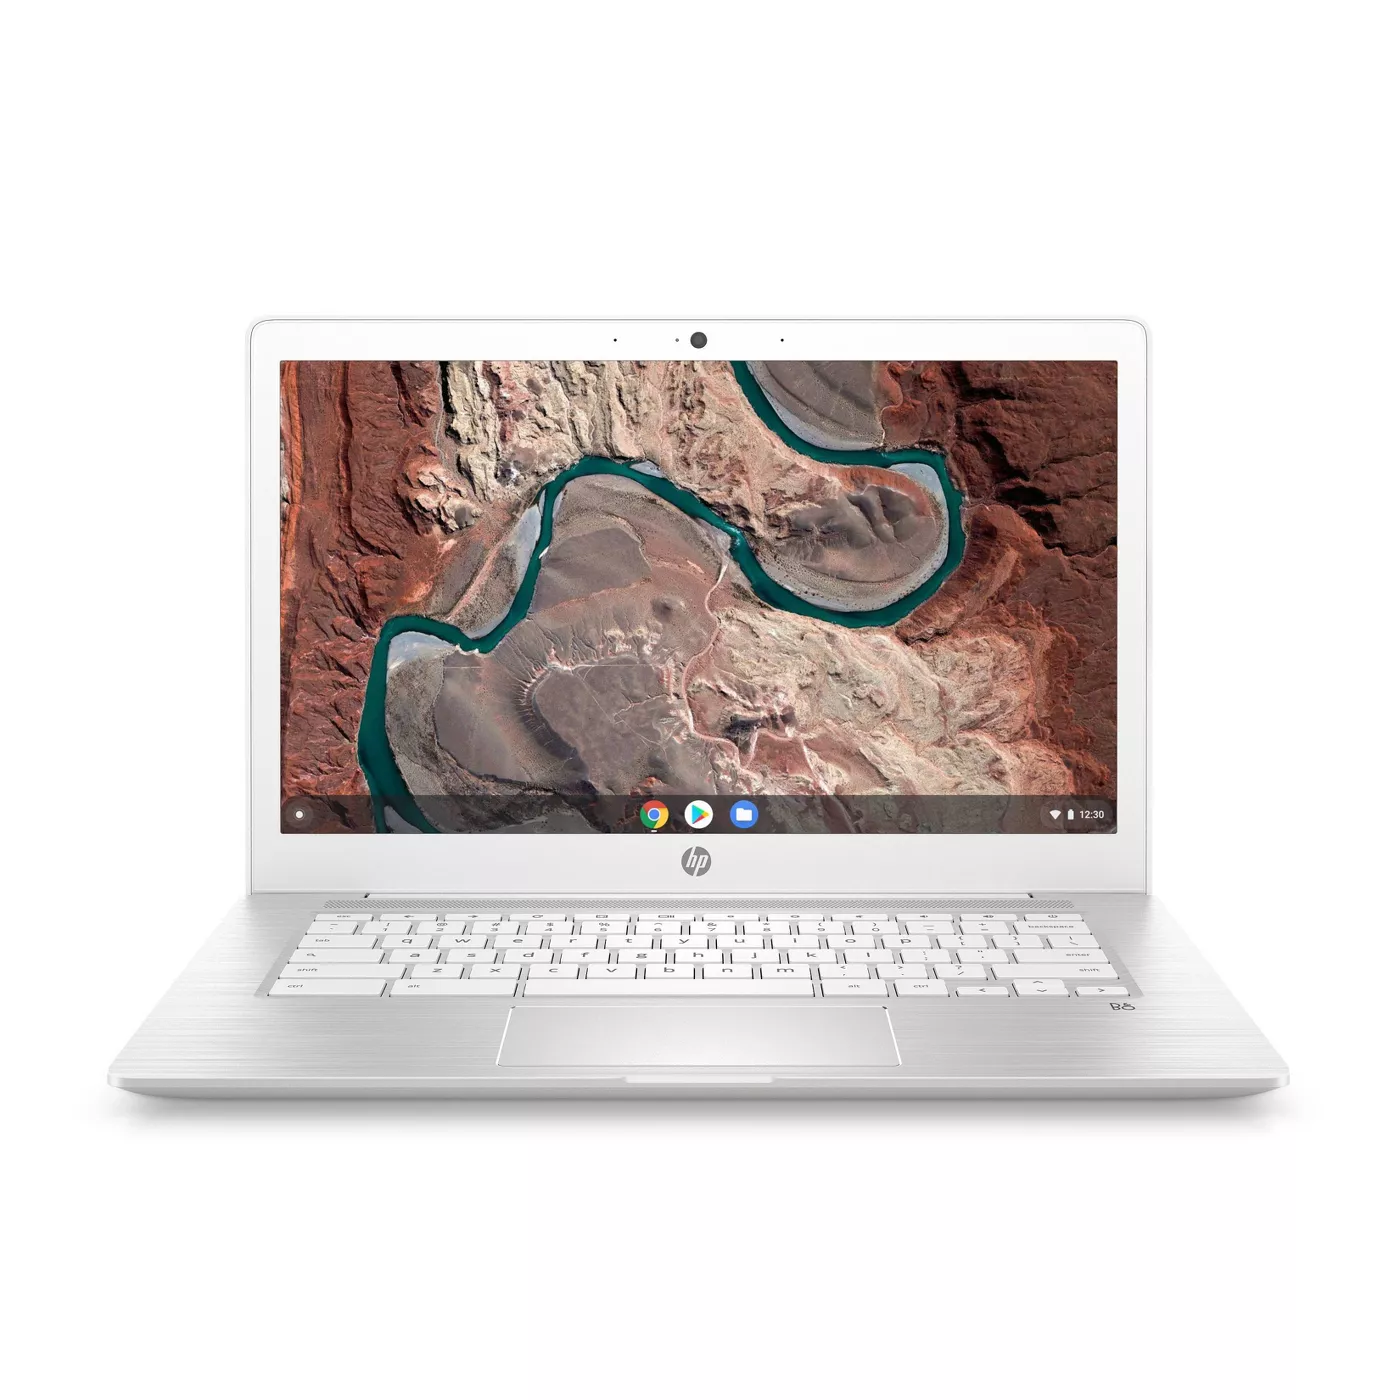 HP 14" Touch Chromebook 11.5 hour battery life 3.39lbs (14-CA137NR), Polished White Design - image 1 of 4